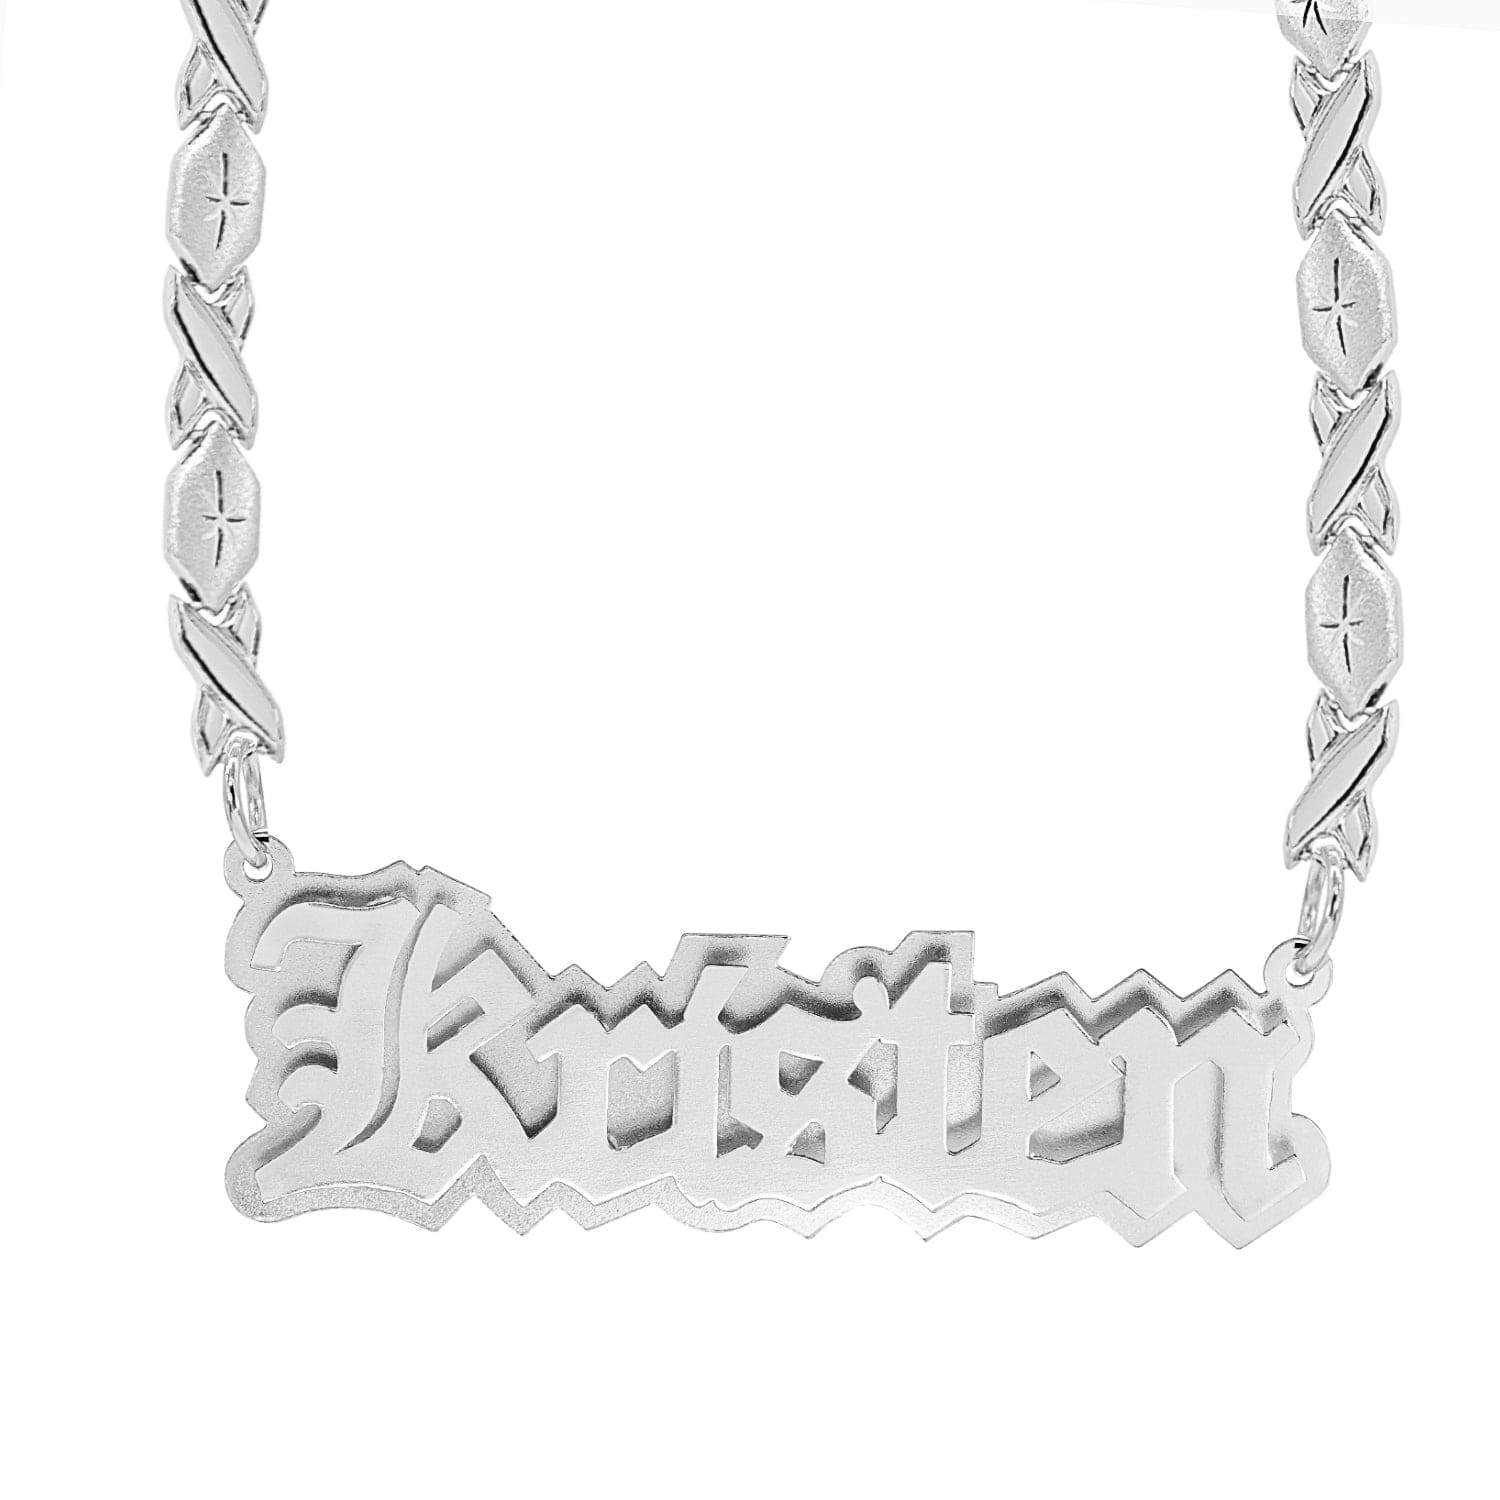 14k Gold over Sterling Silver / Xoxo Chain Double Plated Nameplate Necklace "Kristen" With Xoxo Chain